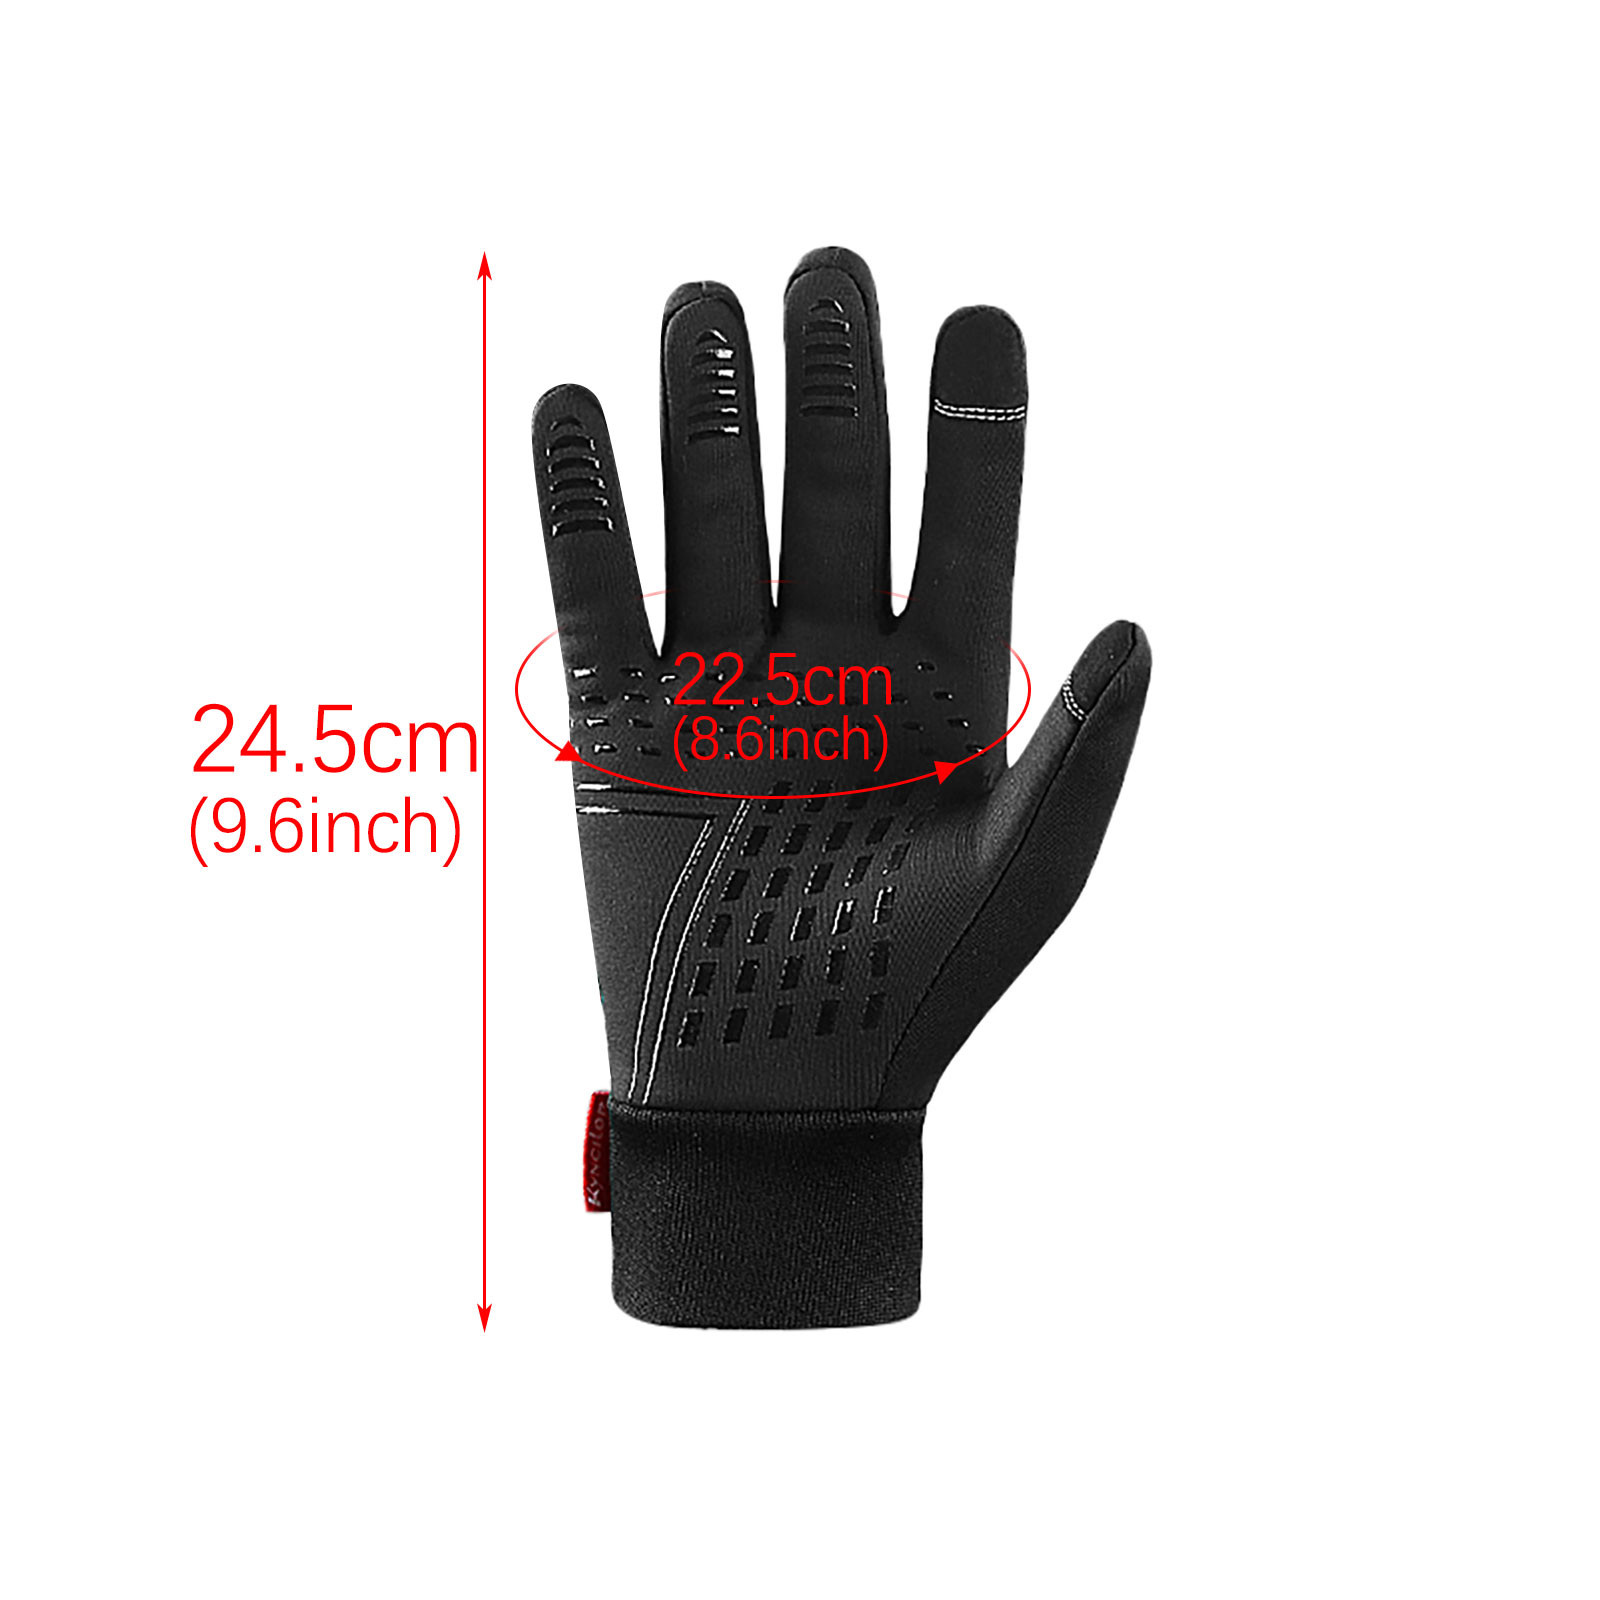 Winter Goves Mens Gloves Ladies Winter Accessories Running Gloves Thermo Touch screen full-finger windproof and warm glove